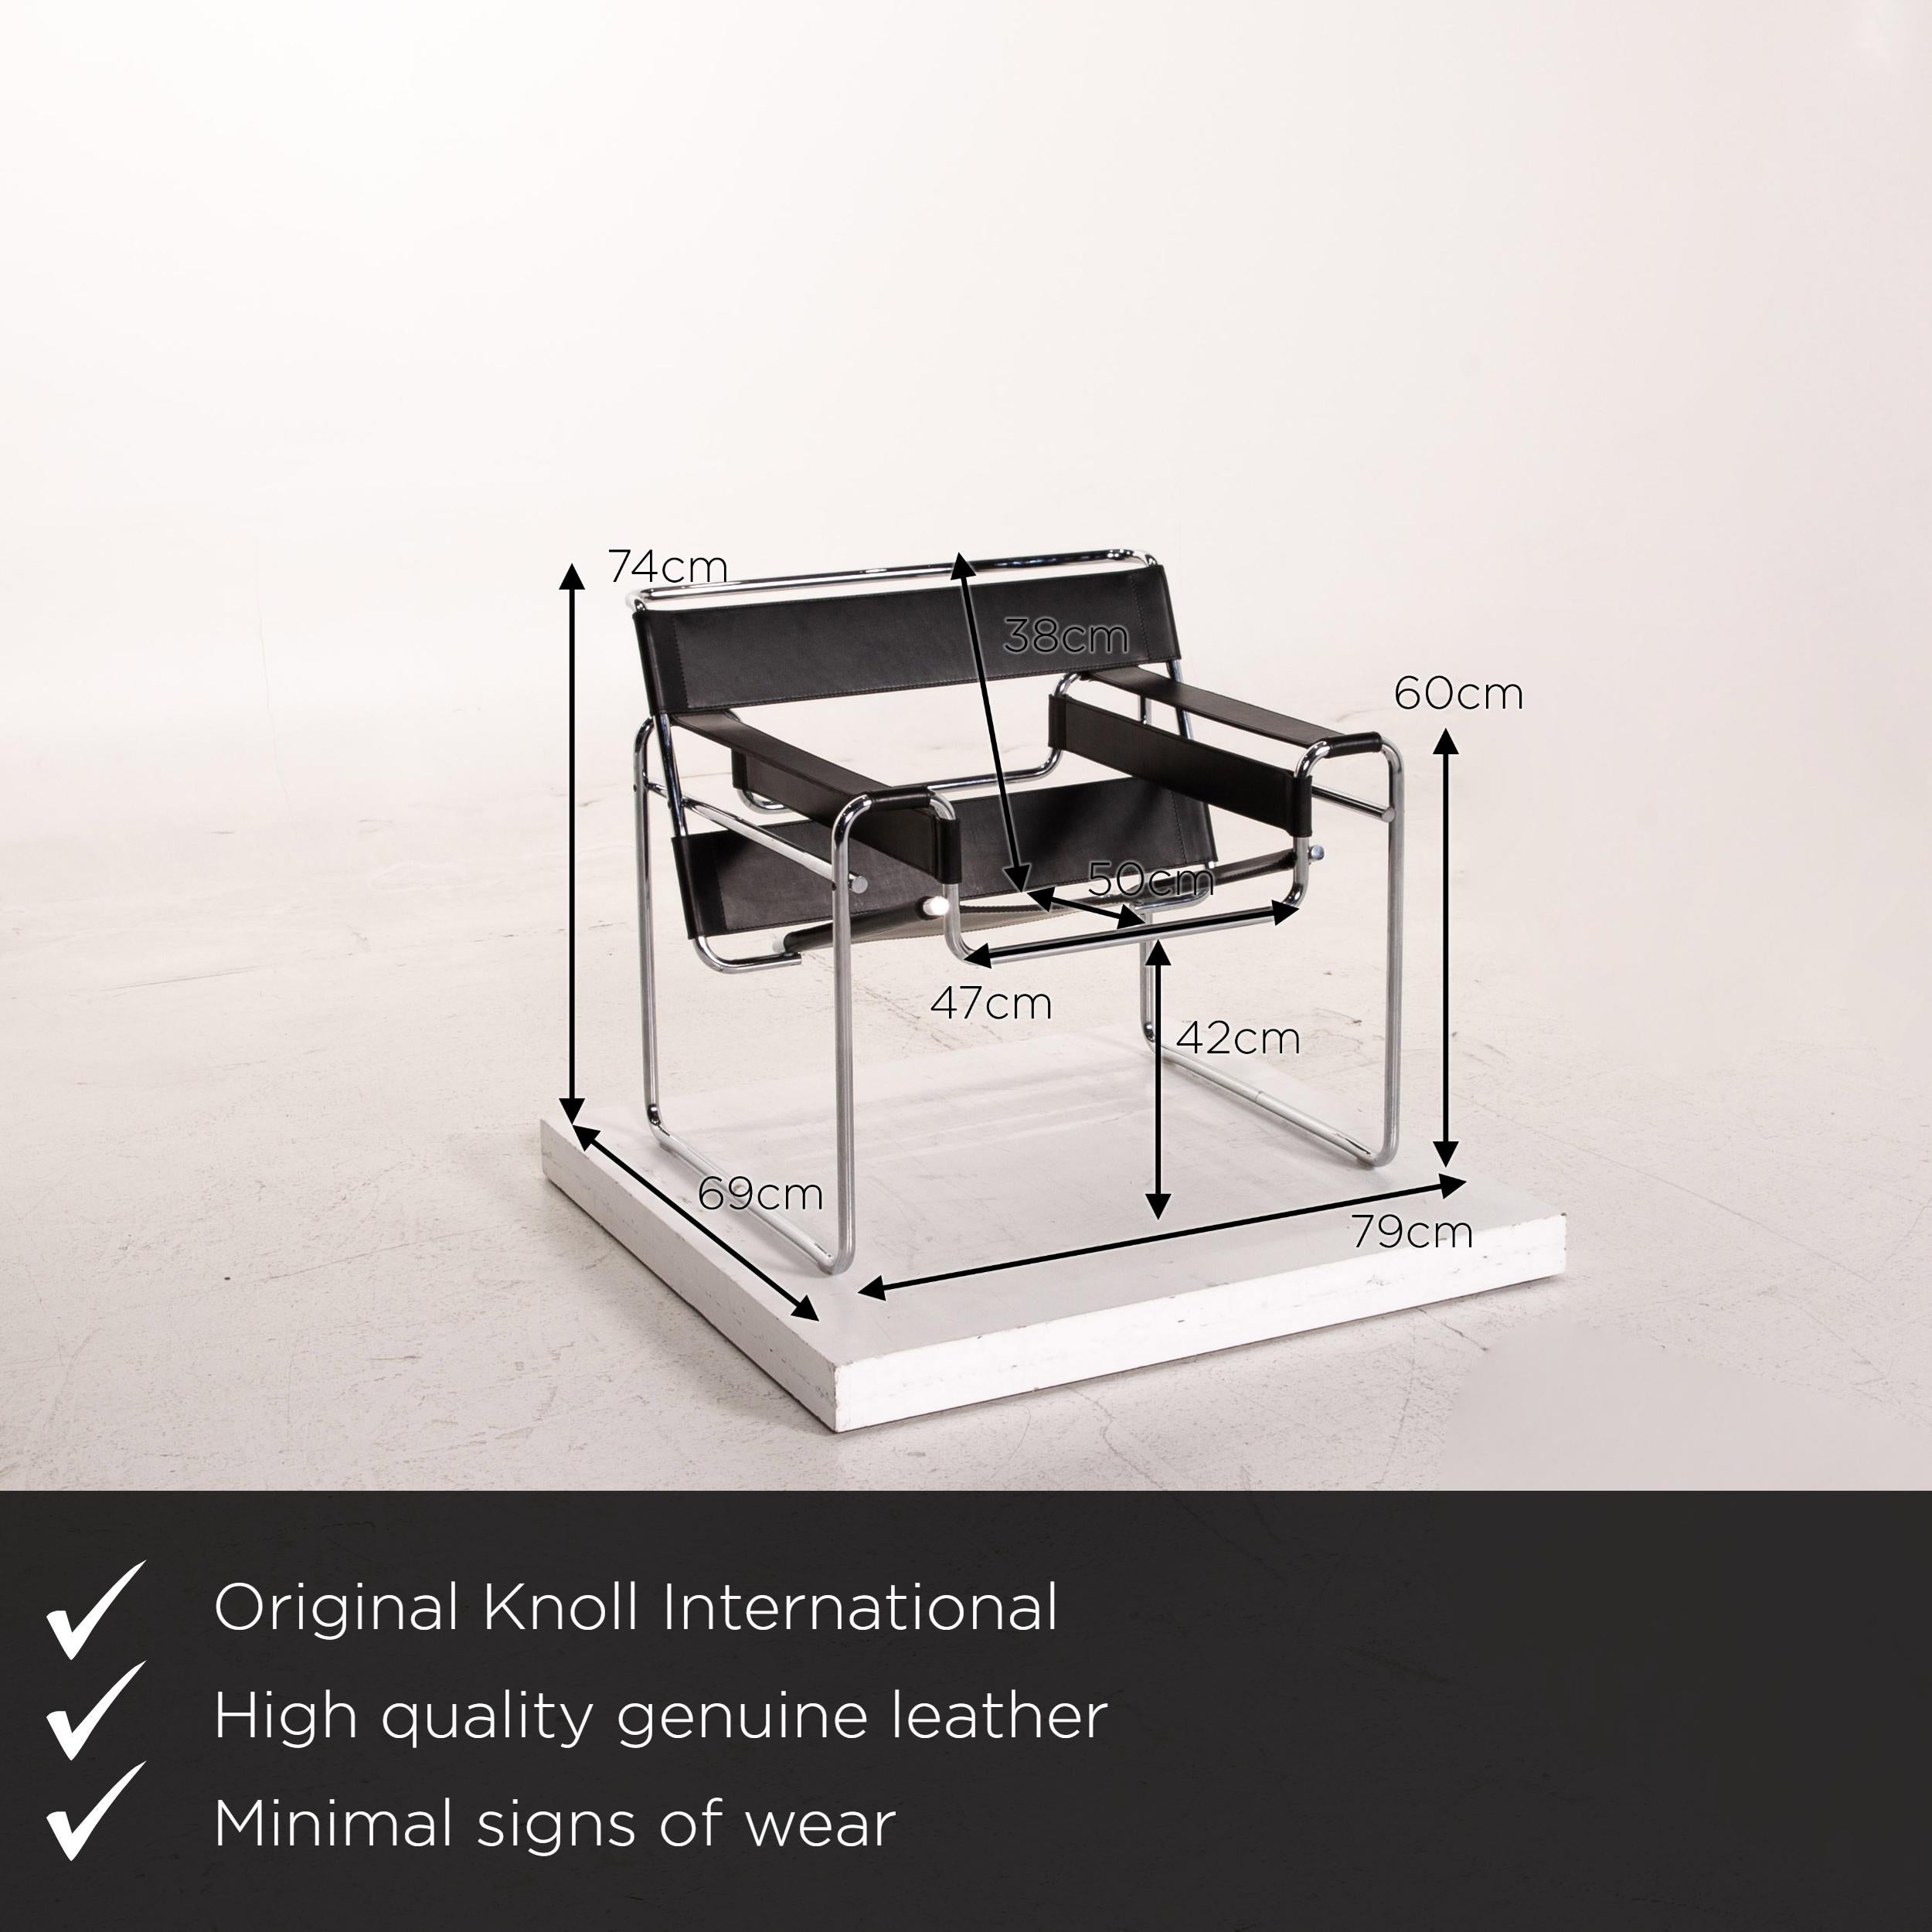 We present to you a Knoll International Wassily chair leather armchair black chair Marcel Breuer.
   
 

 Product measurements in centimeters:
 

Depth 69
Width 79
Height 74
Seat height 42
Rest height 60
Seat depth 50
Seat width